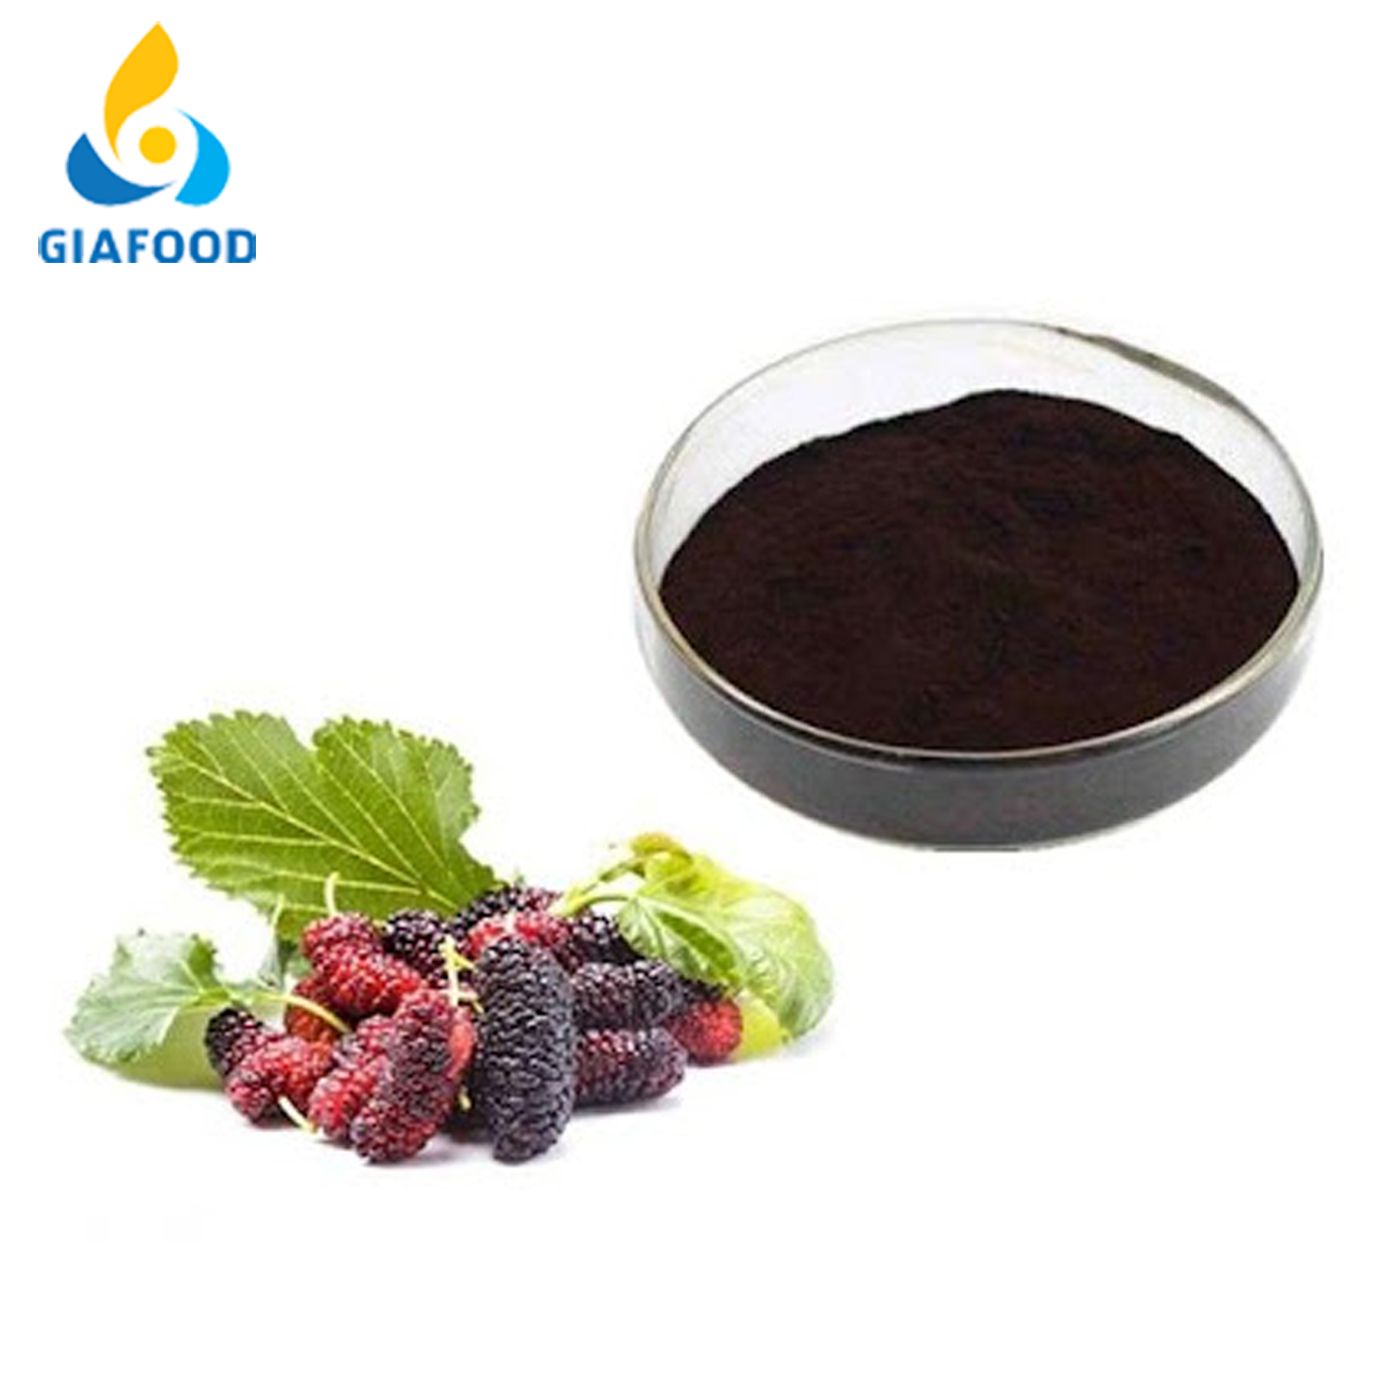  MULBERRY EXTRACT 